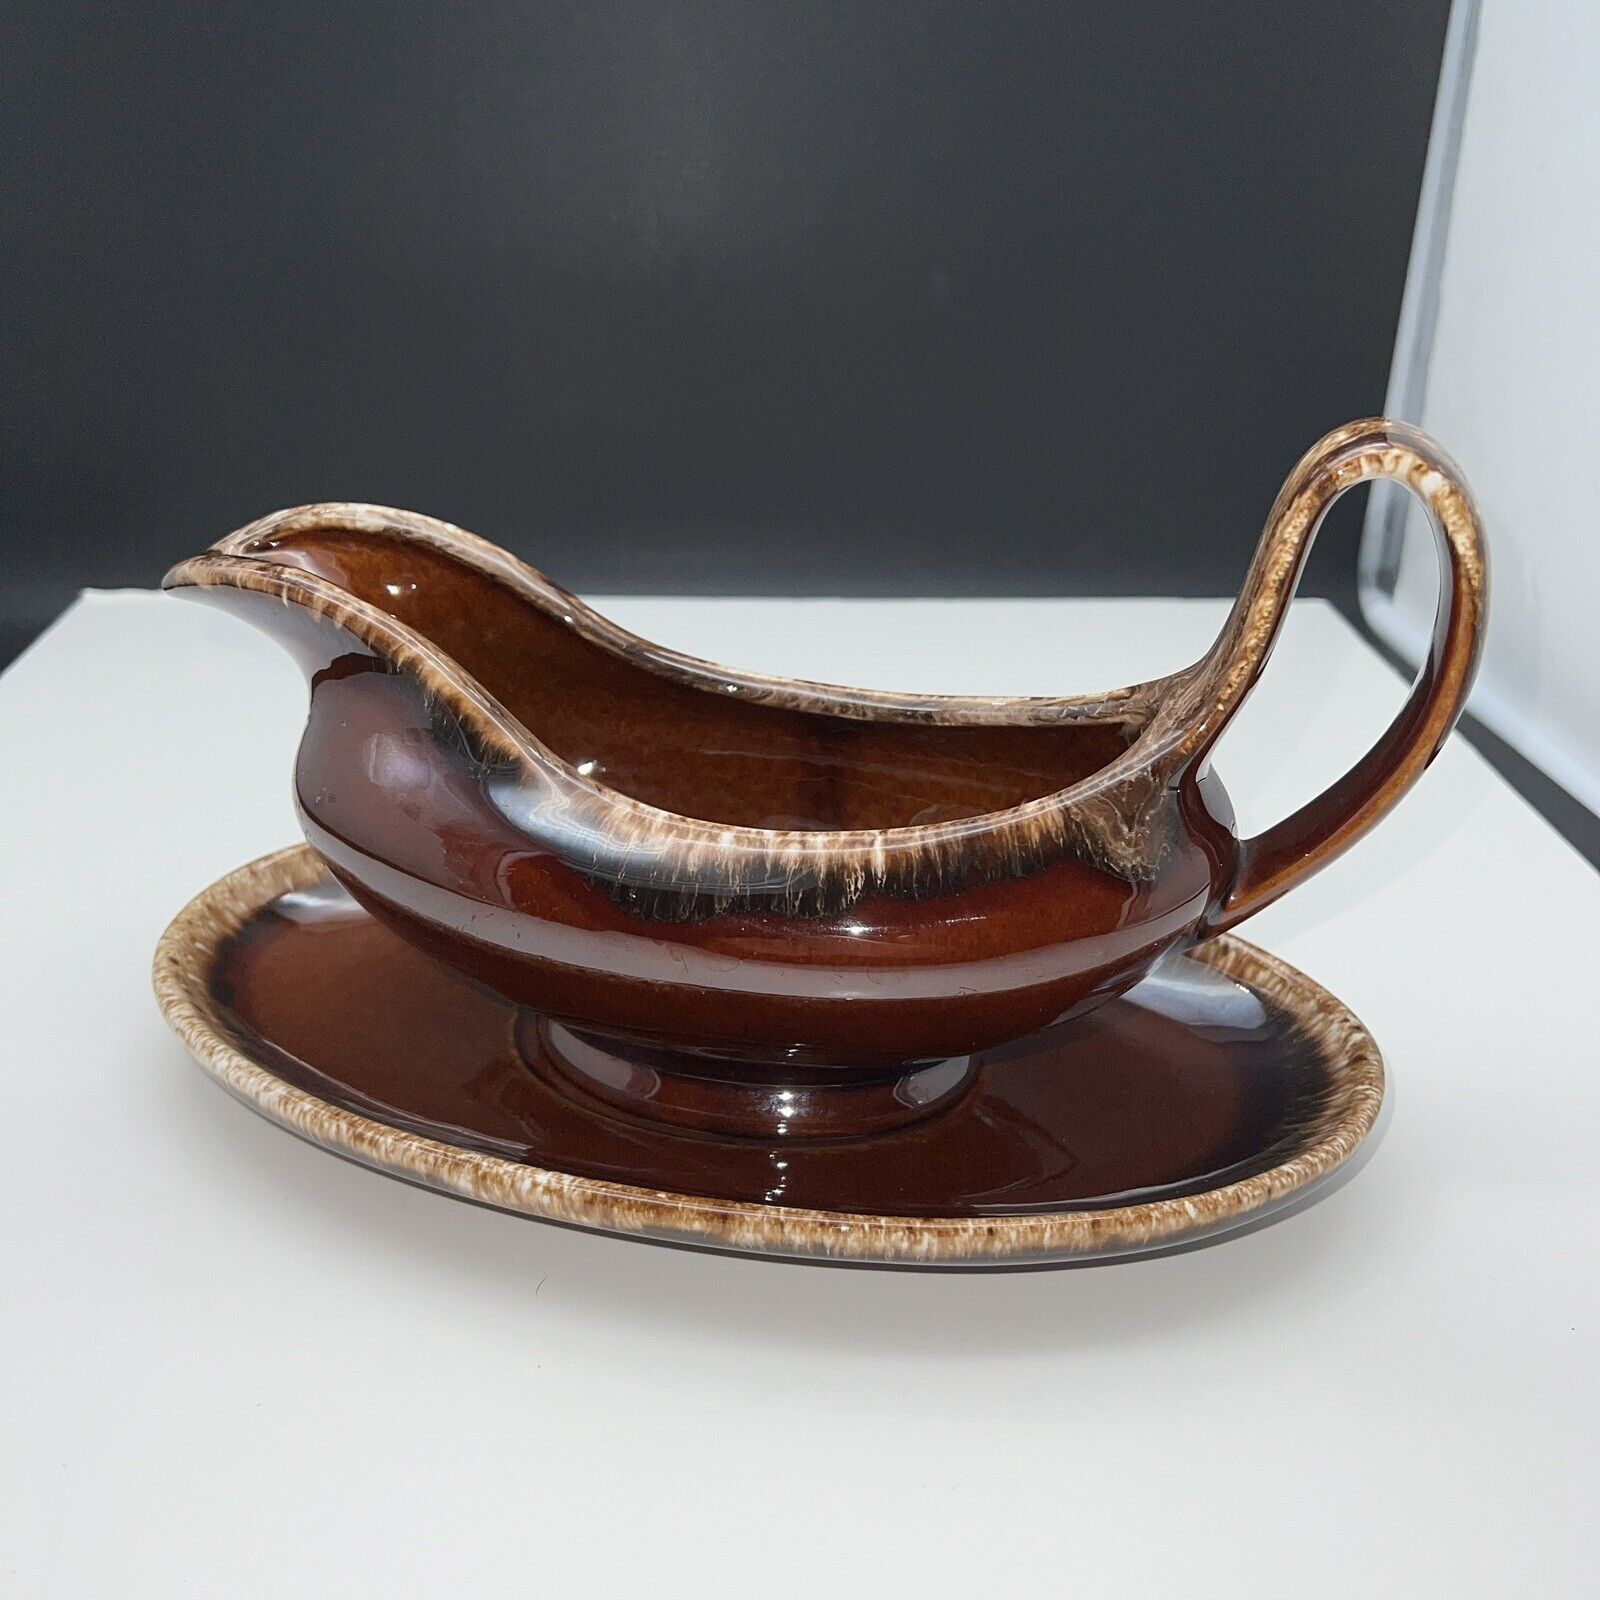 Vintage HULL Pottery Large Gravy Boat w Oval Under Plate Brown Drip Oven Proof